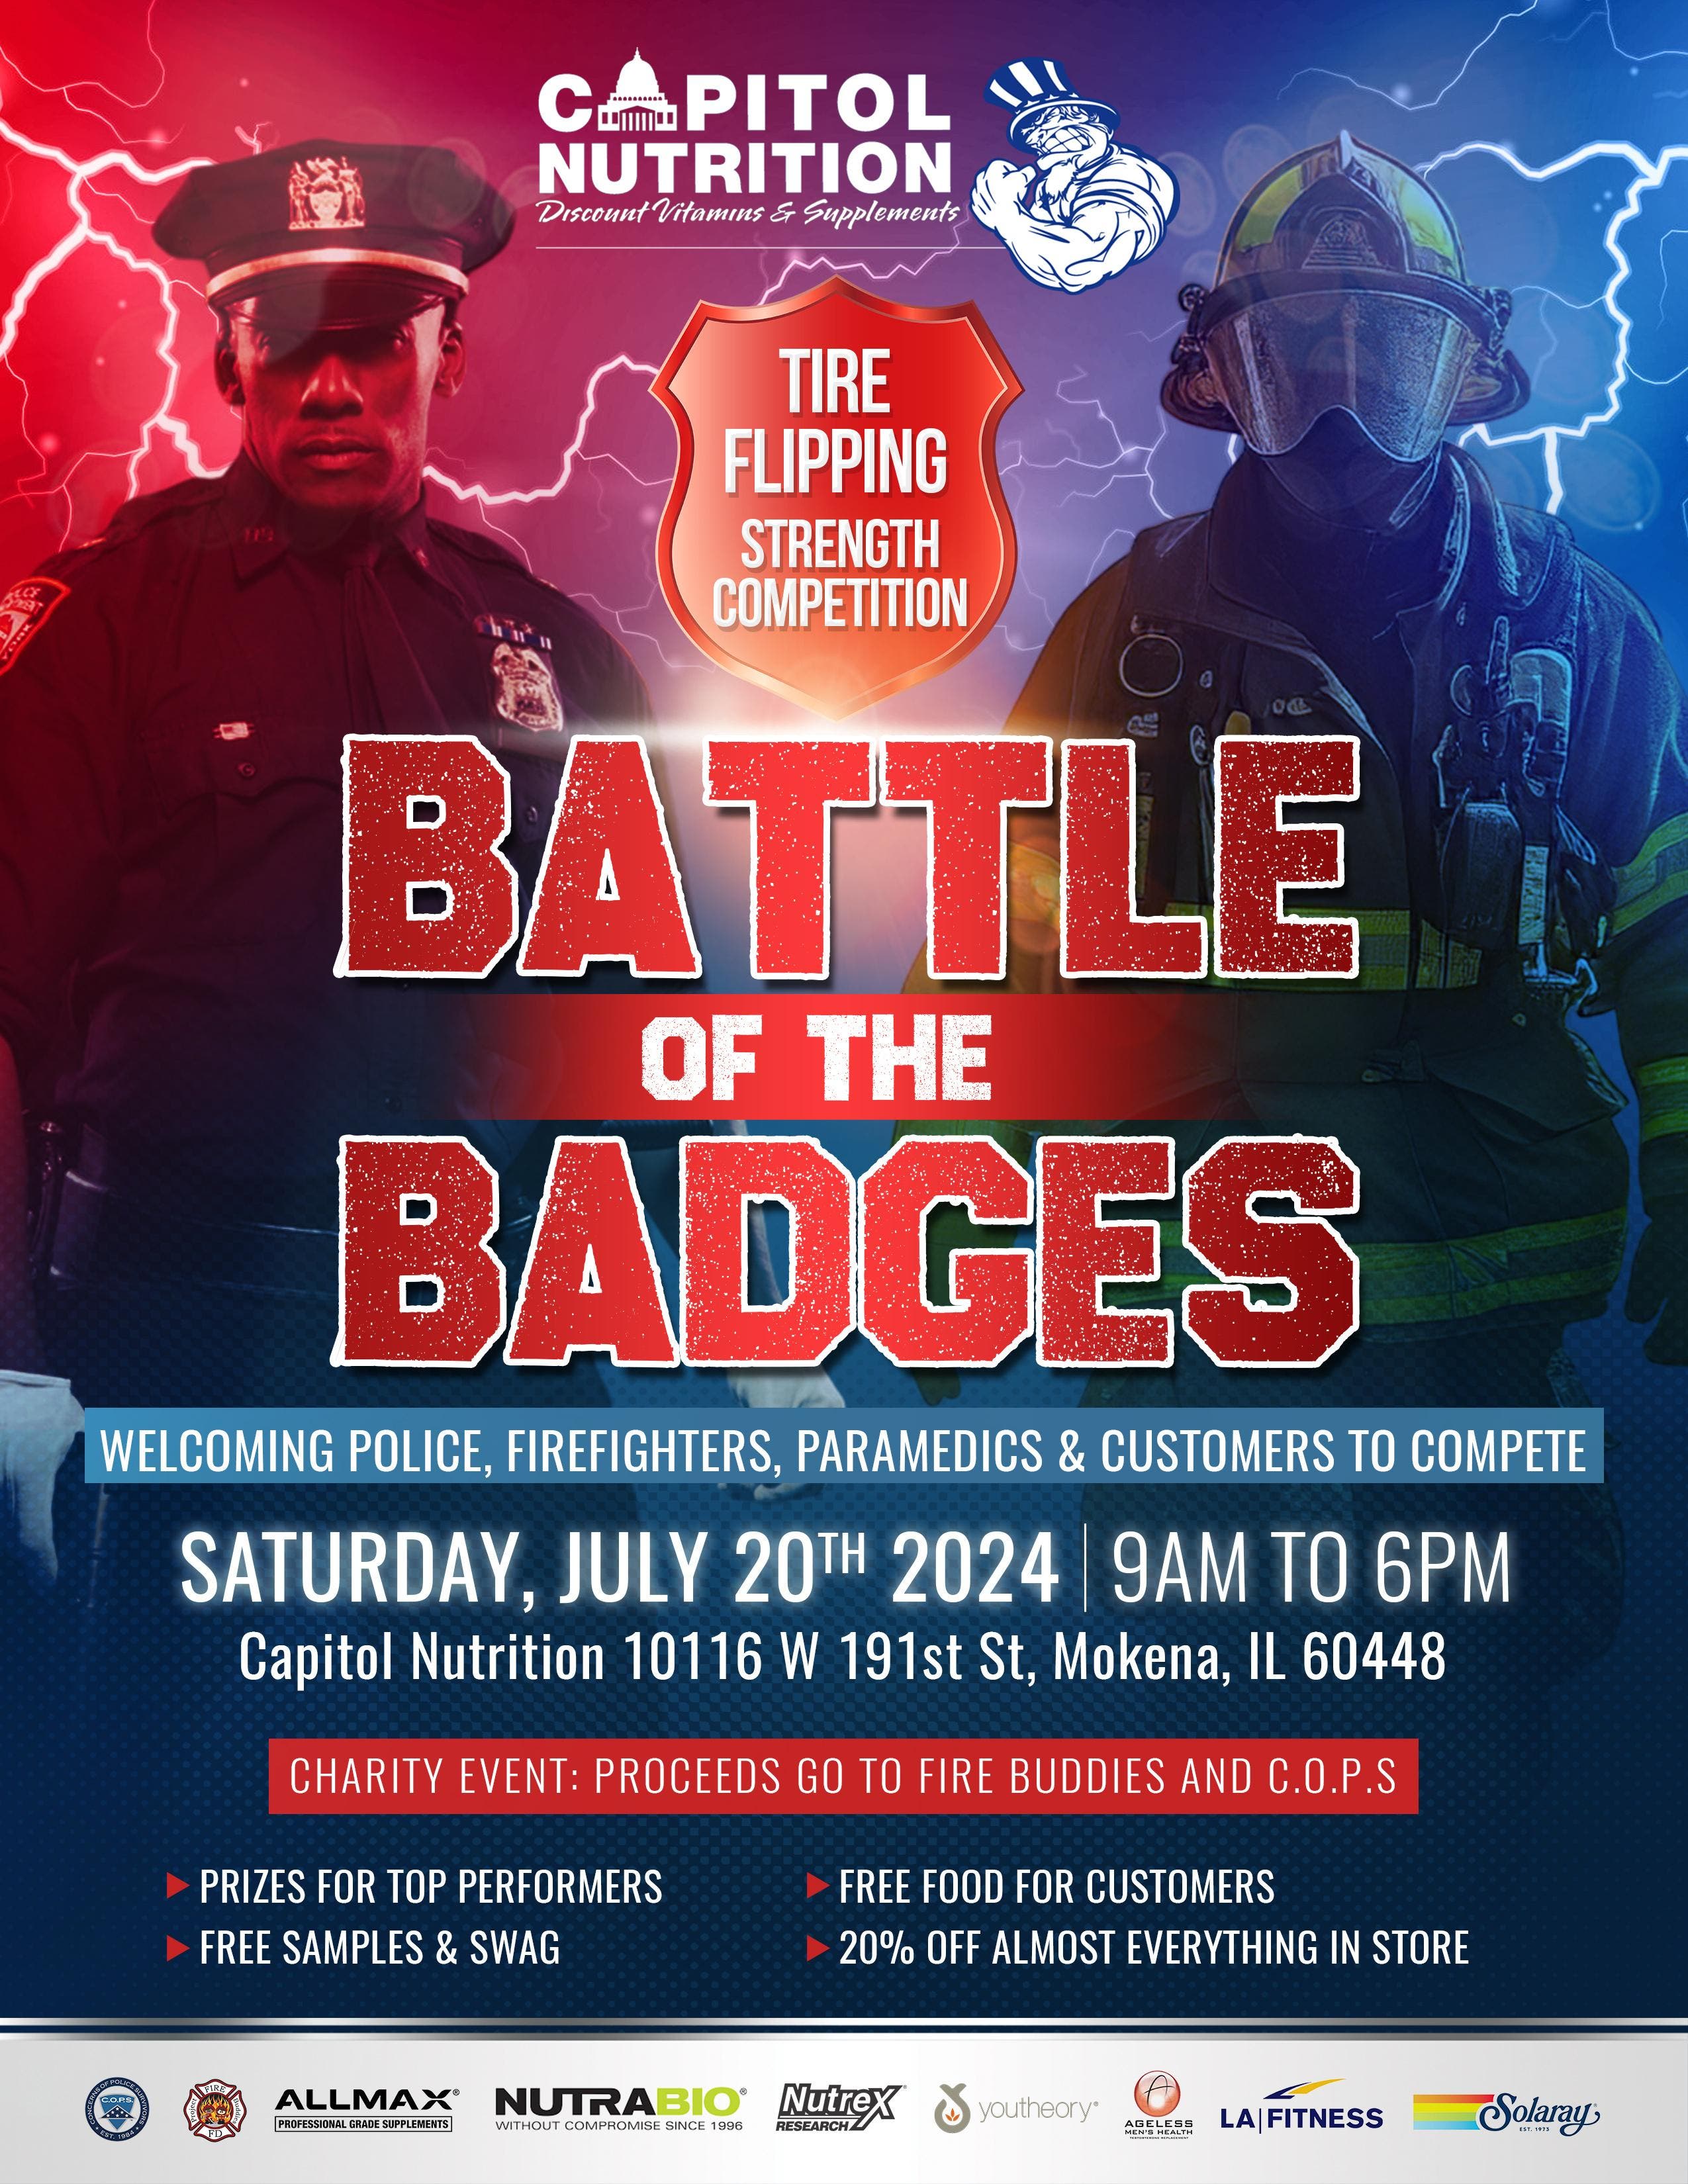 Battle of the Badges Tire Flipping Competition & Sale